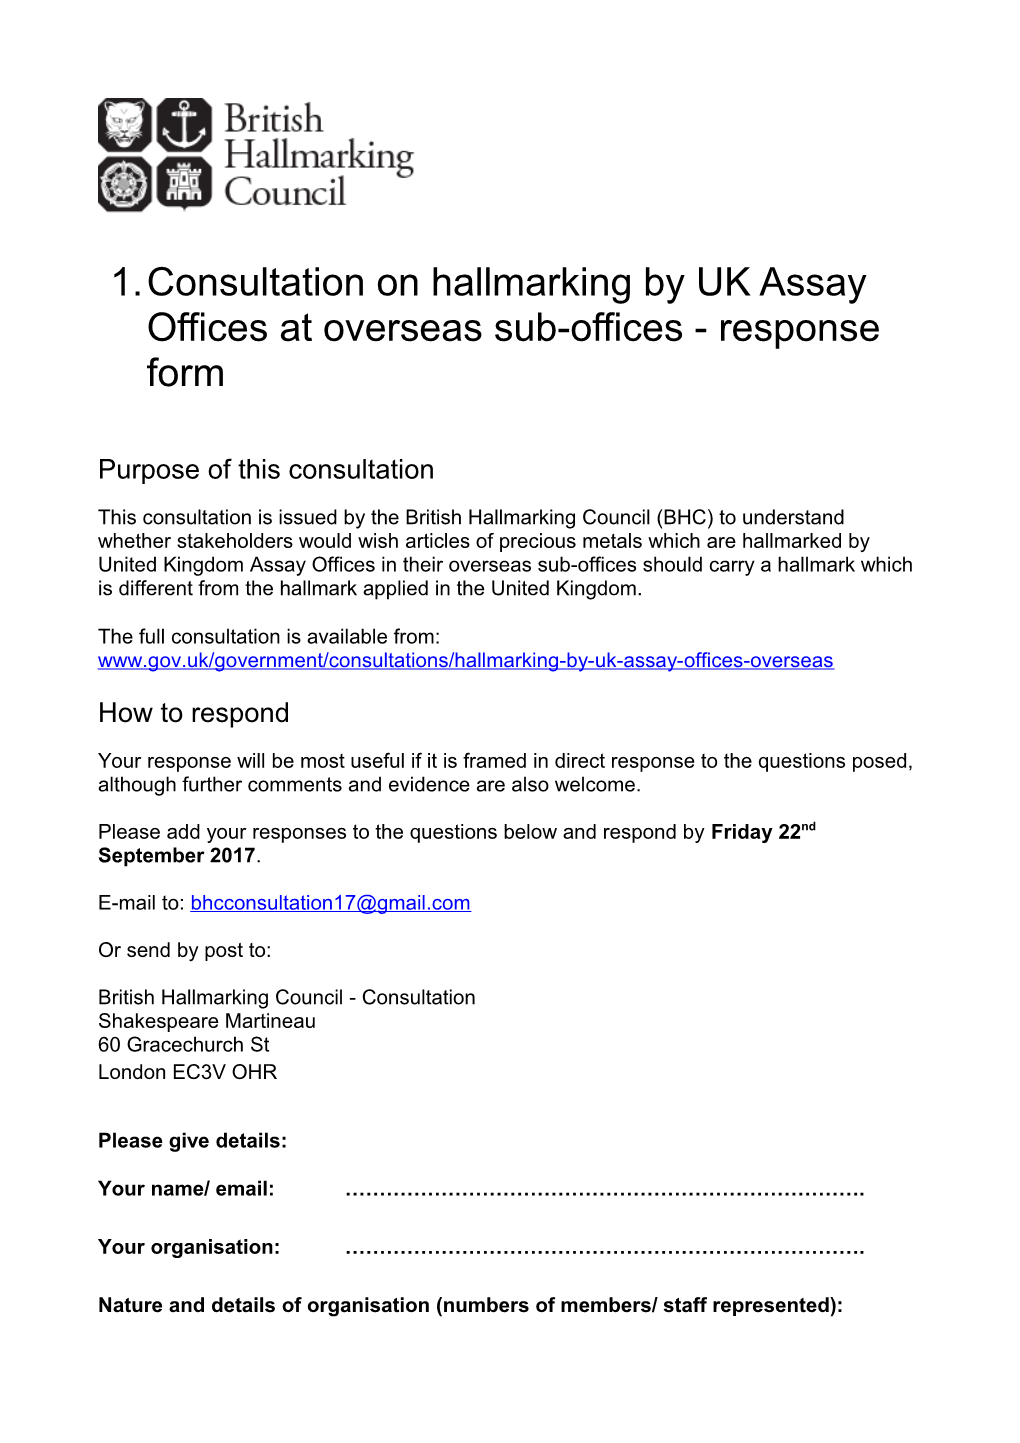 Consultation on Hallmarking by UK Assay Offices at Overseas Sub-Offices - Response Form